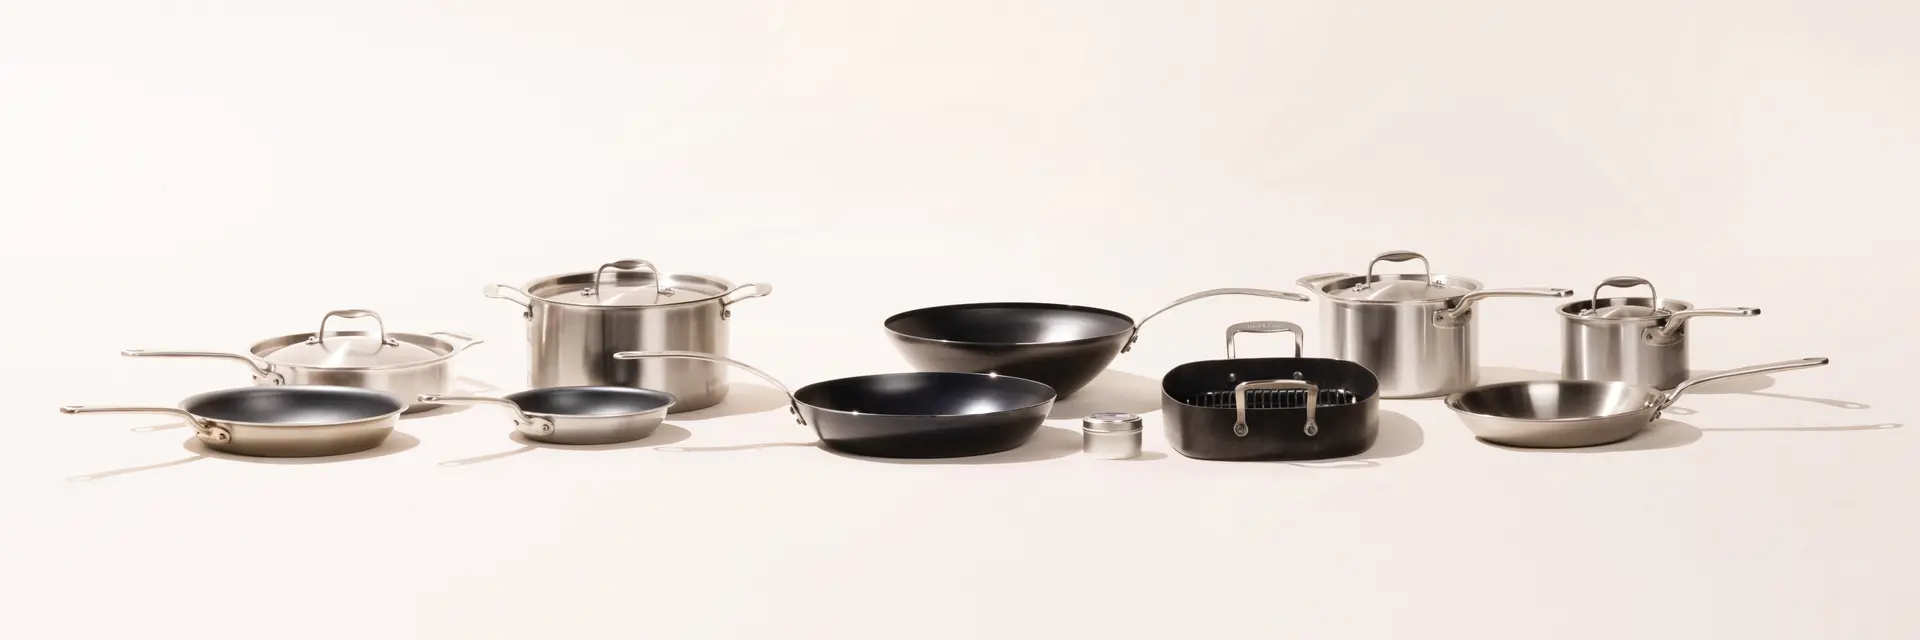 A variety of stainless steel and non-stick cookware including pots and pans with lids spread out on a light background.